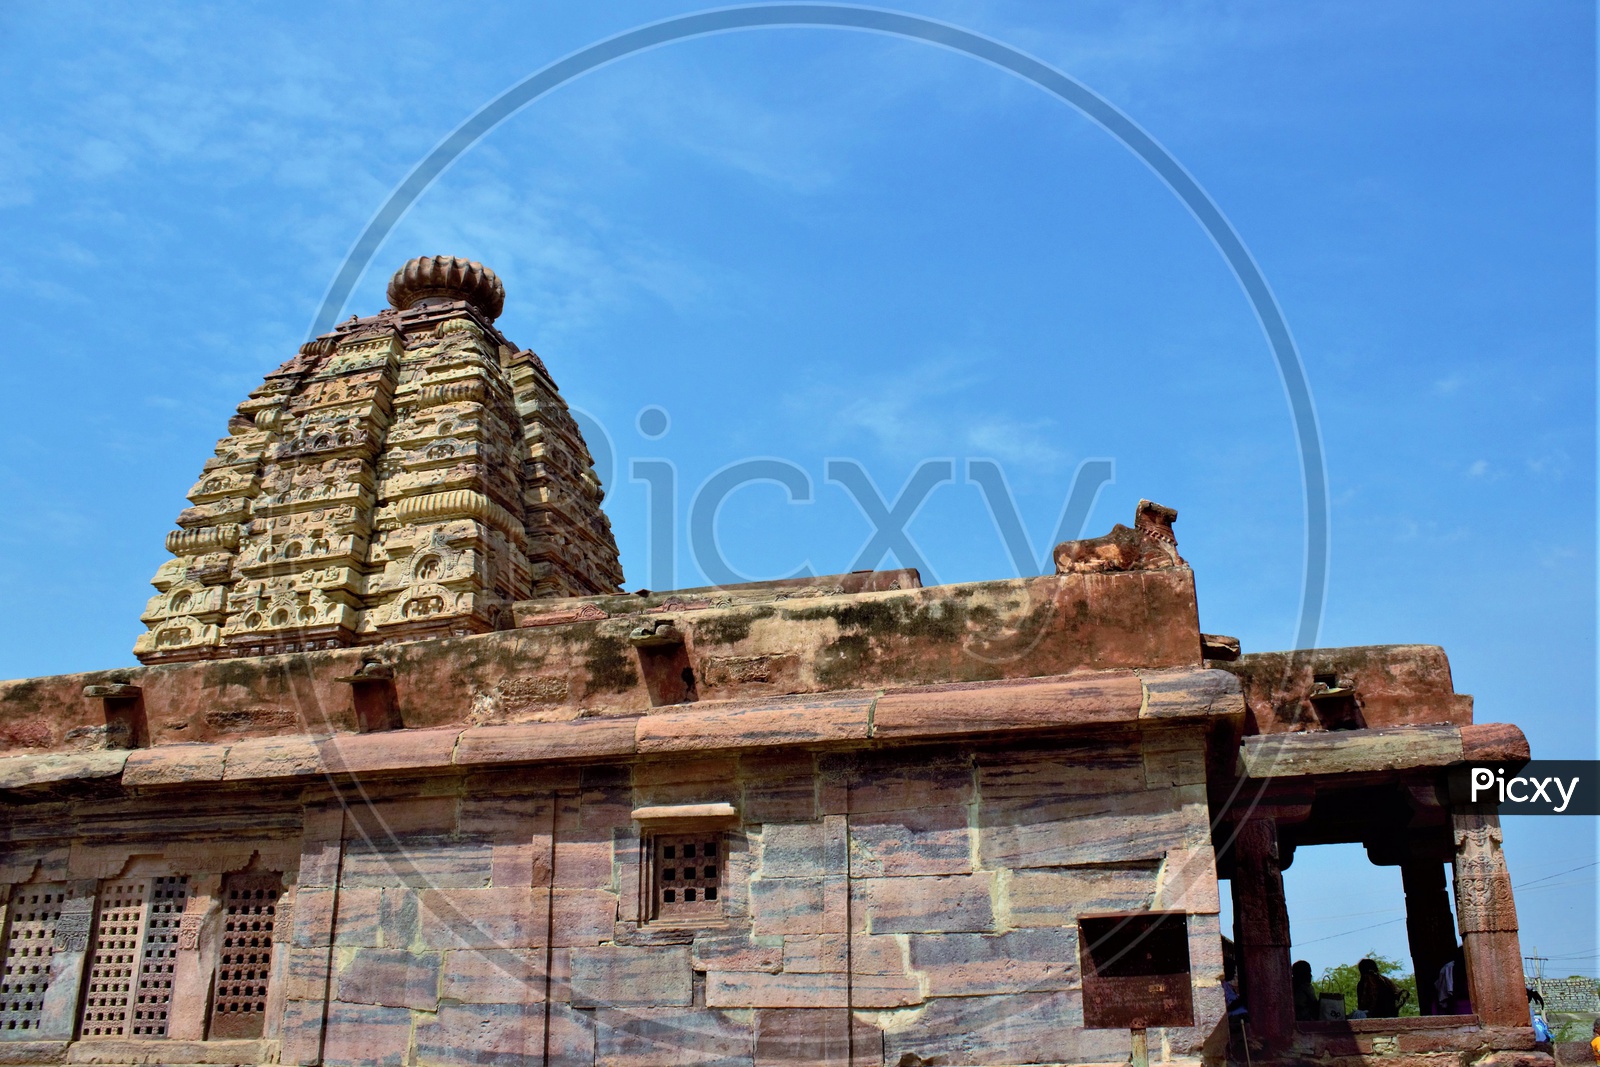 Architecture Of Hindu temples With Temple Shrine  of  Alampur Jogulamba Temple